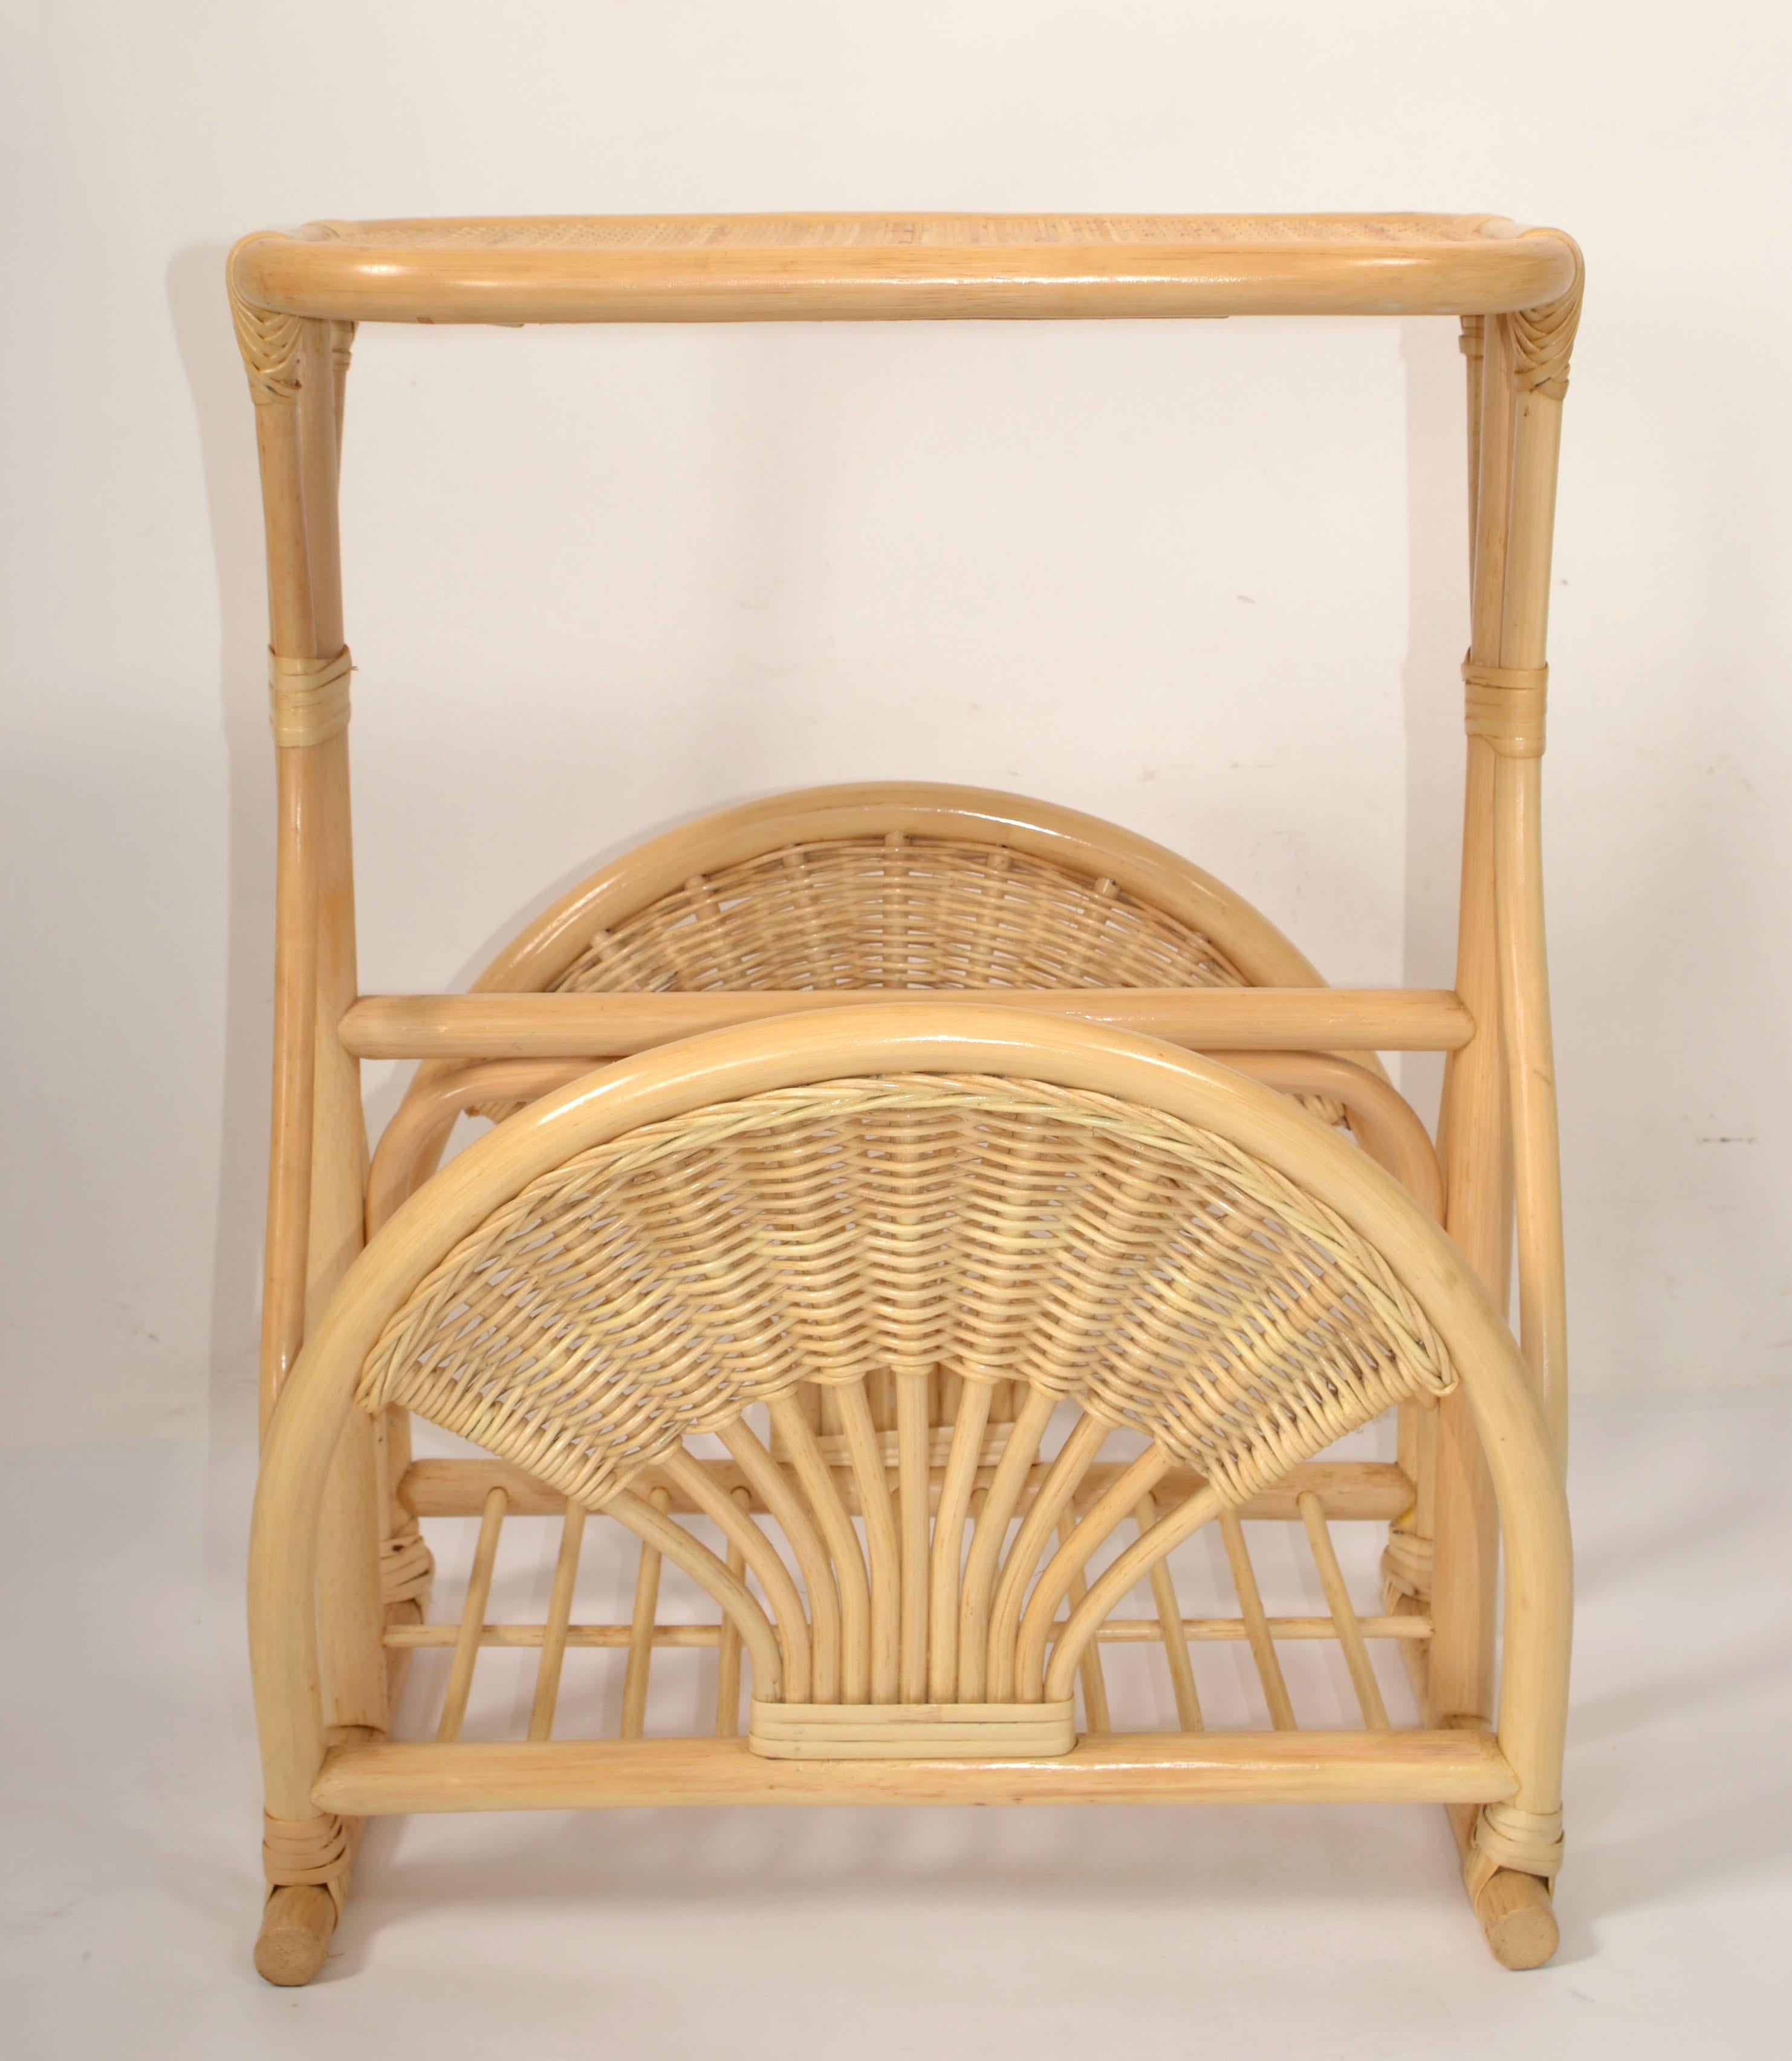 Bamboo Cane Wicker Mid-Century Modern Side Bedside End Sofa Table Magazine Stand In Good Condition For Sale In Miami, FL